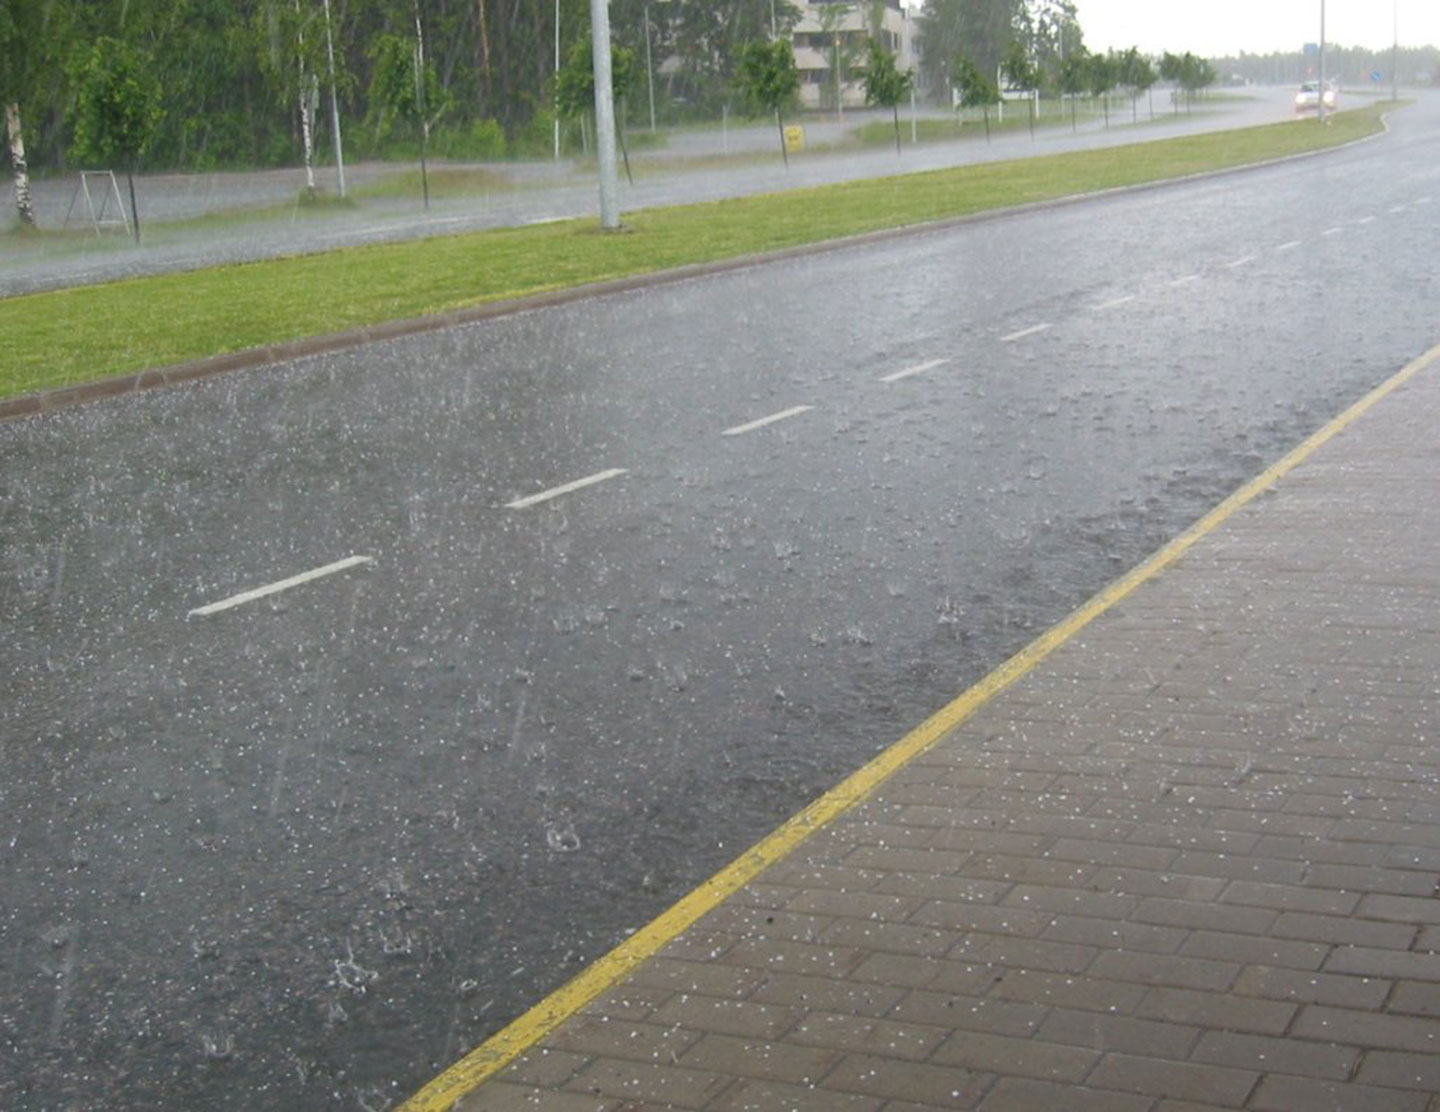 Hail falling on a road